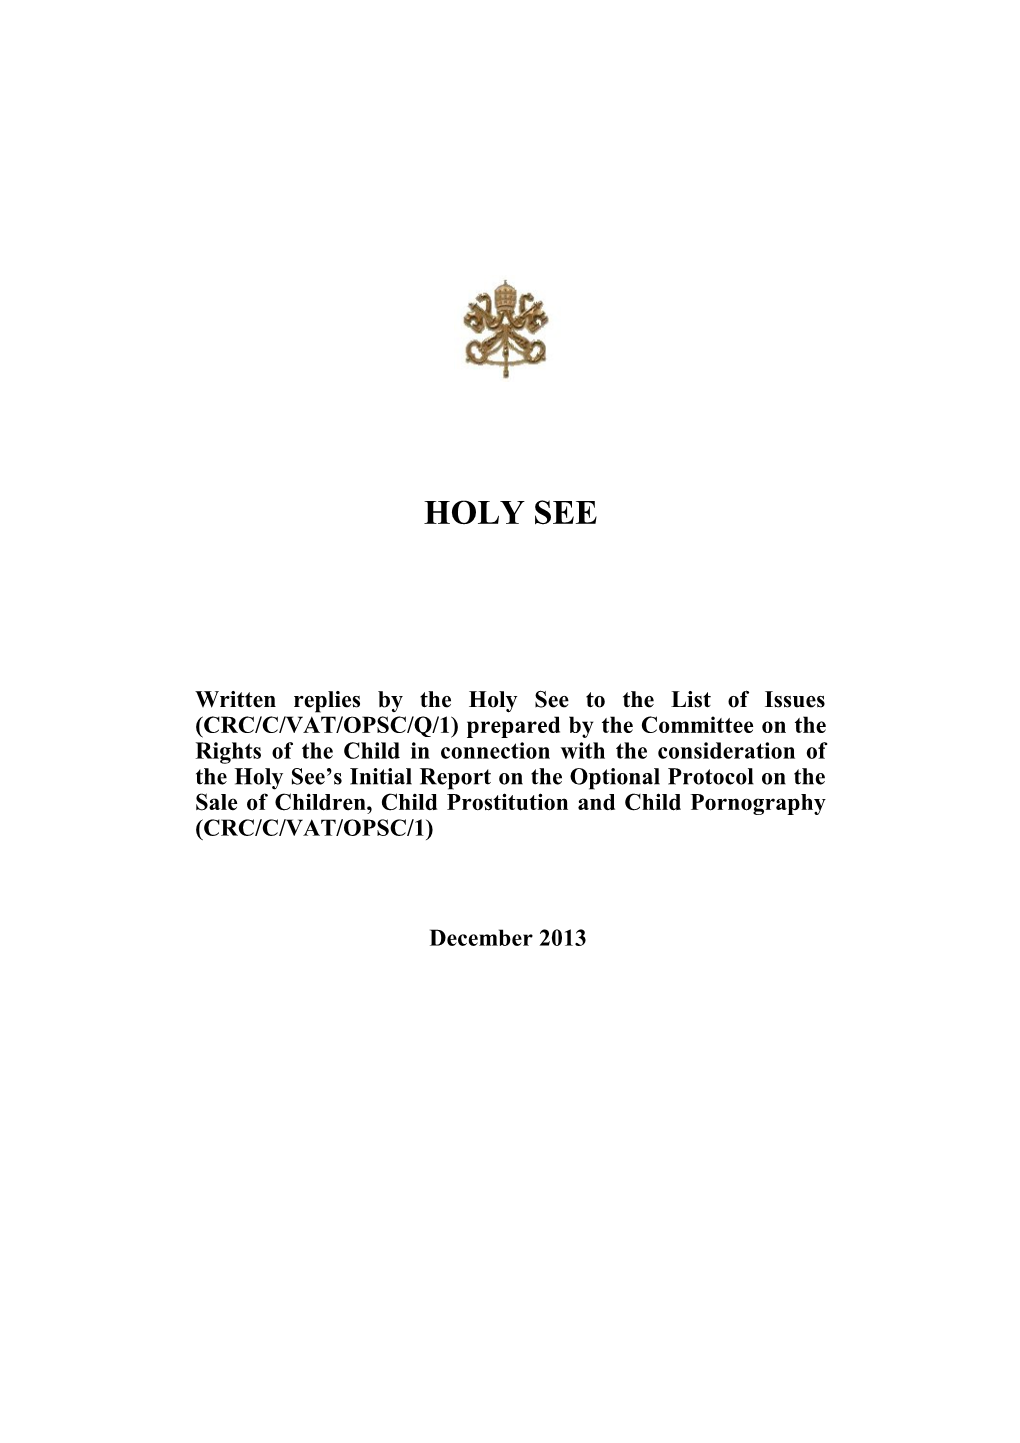 Written Replies by the Holy See to the List of Issues (CRC/C/VAT/OPSC/Q/1) Prepared By